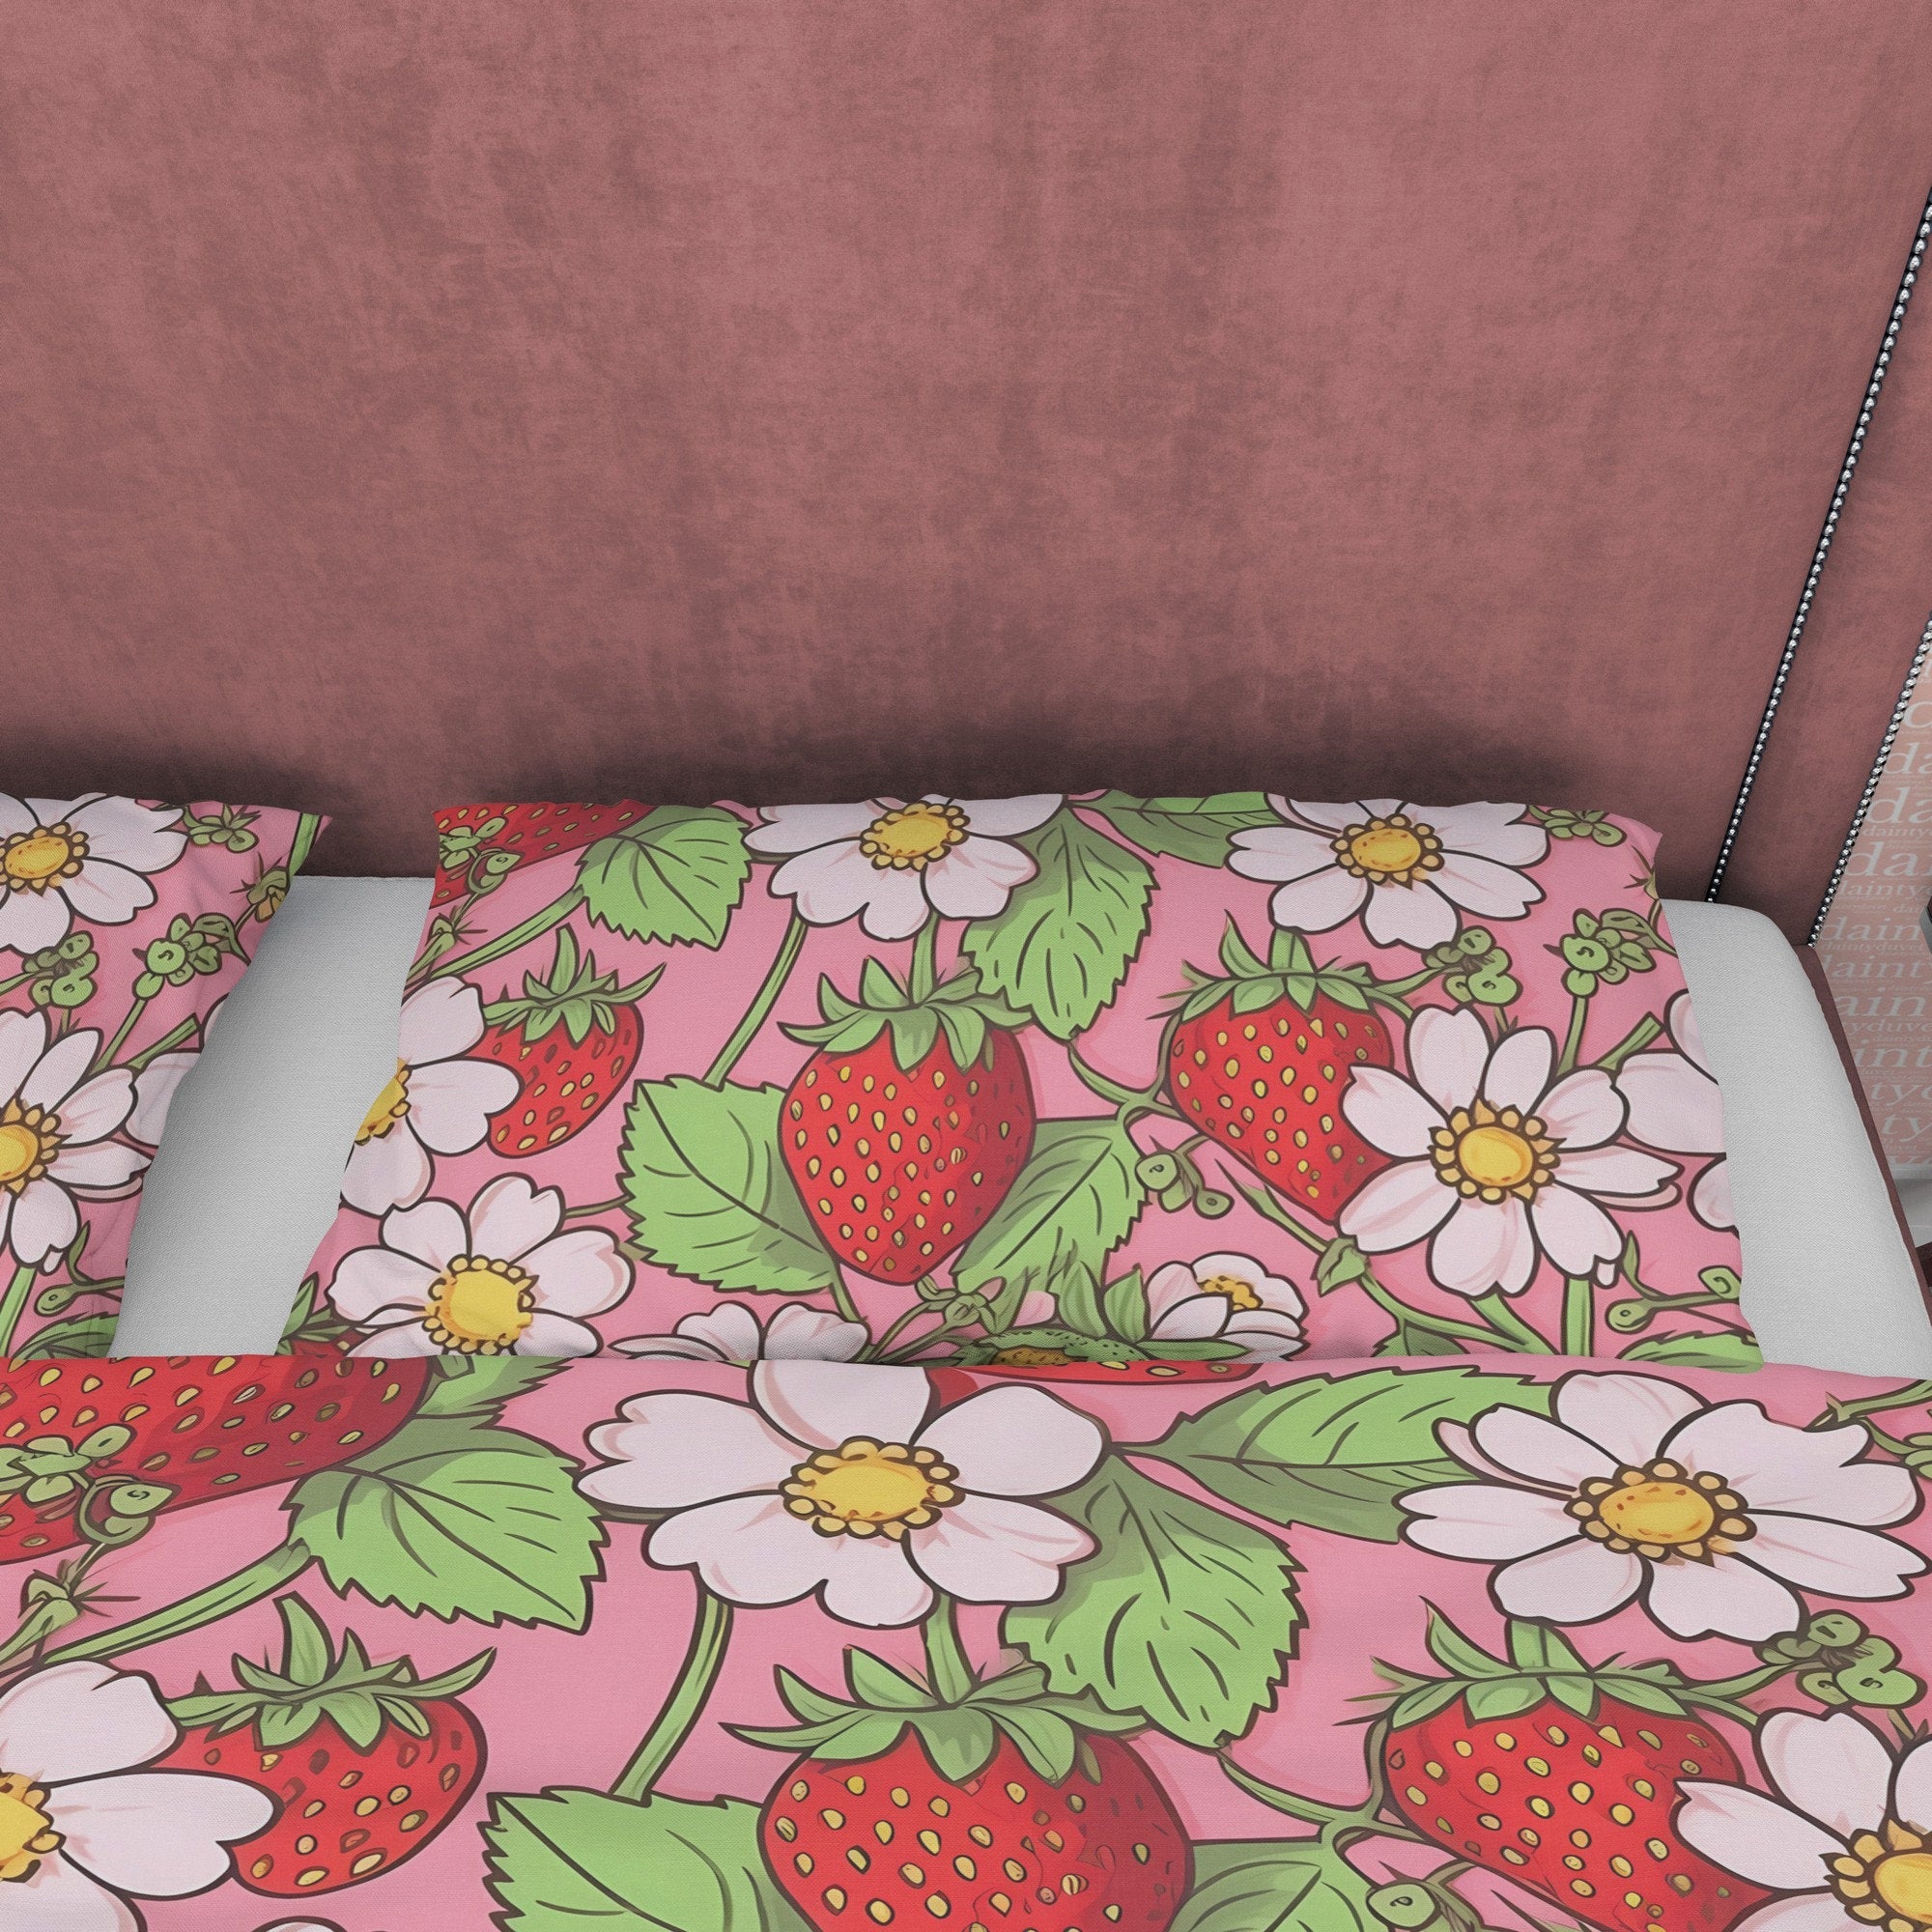 Strawberry Duvet Cover Boho Bedroom Set, Floral Pink Cute Bedspread, Girly Quilt Cover, Dorm Bedding, Baby Girl Toddler Bedding, Foodie Gift